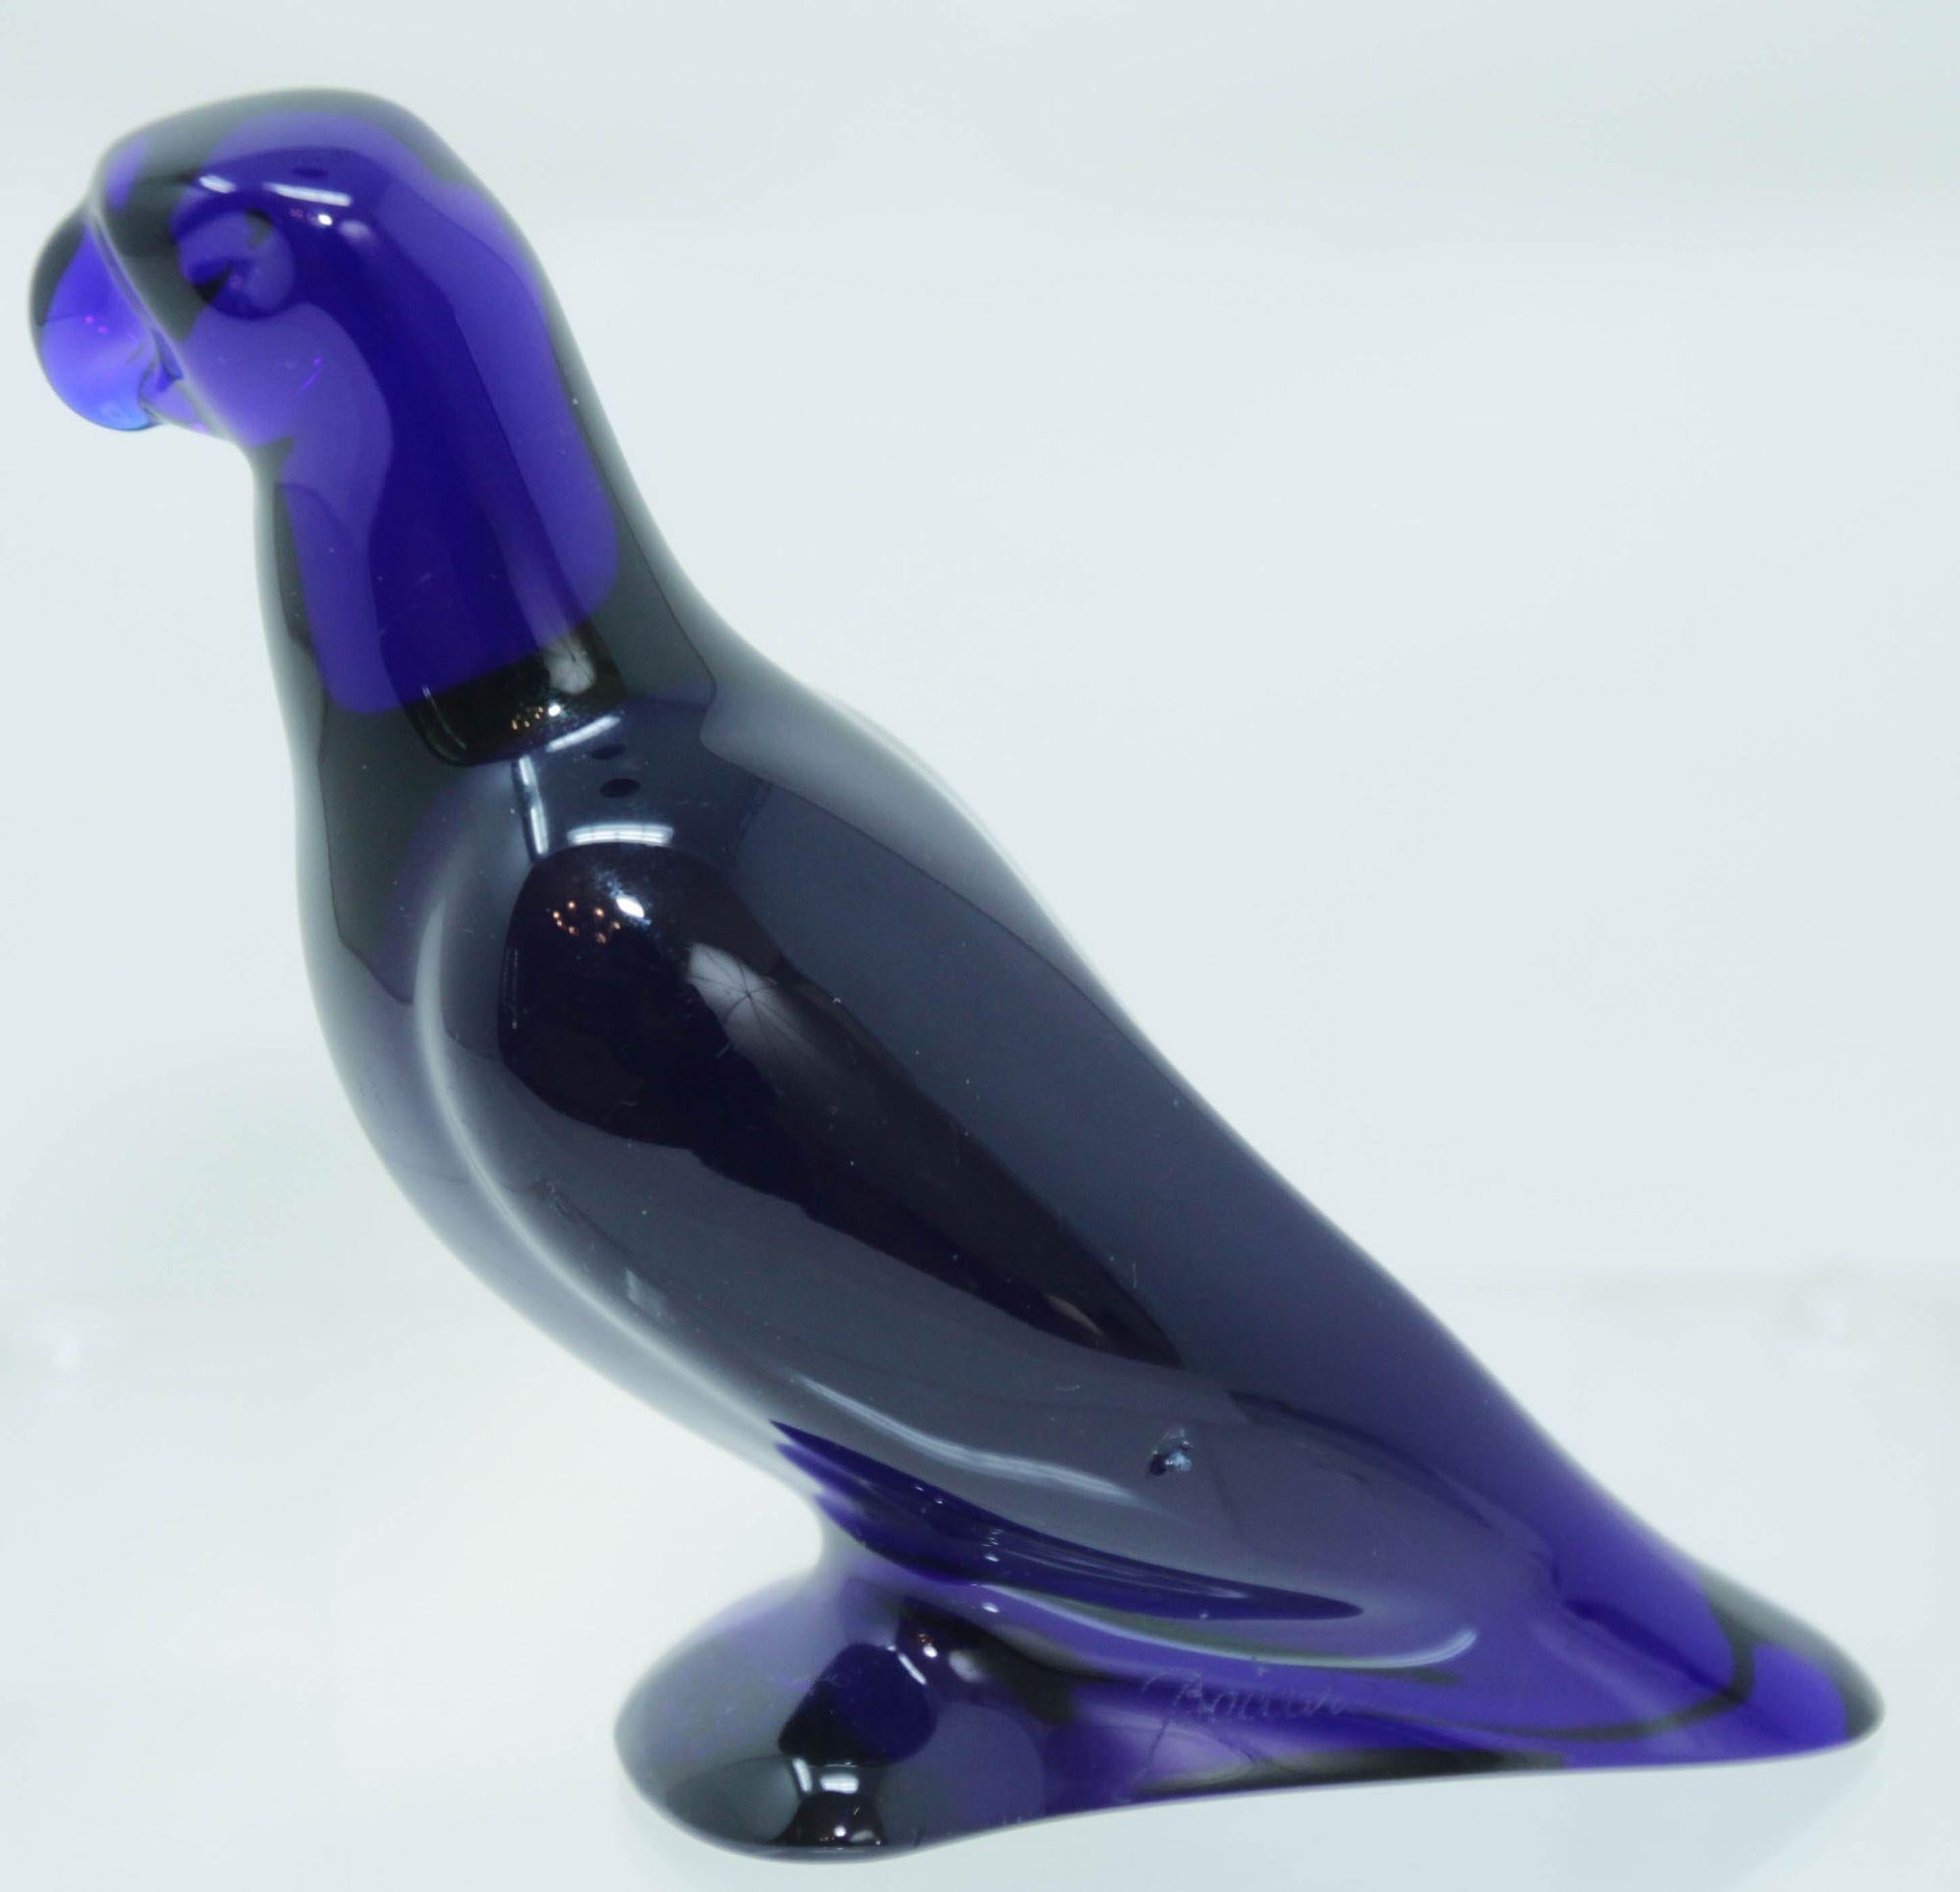 Baccarat French cobalt blue glass parrot paperweight.
Baccarat France crystal cobalt blue glass parrot bird paperweight figurine
A finely stunning deep cobalt blue crystal handmade Baccarat French glass paperweight modeled as a parrot by renowned